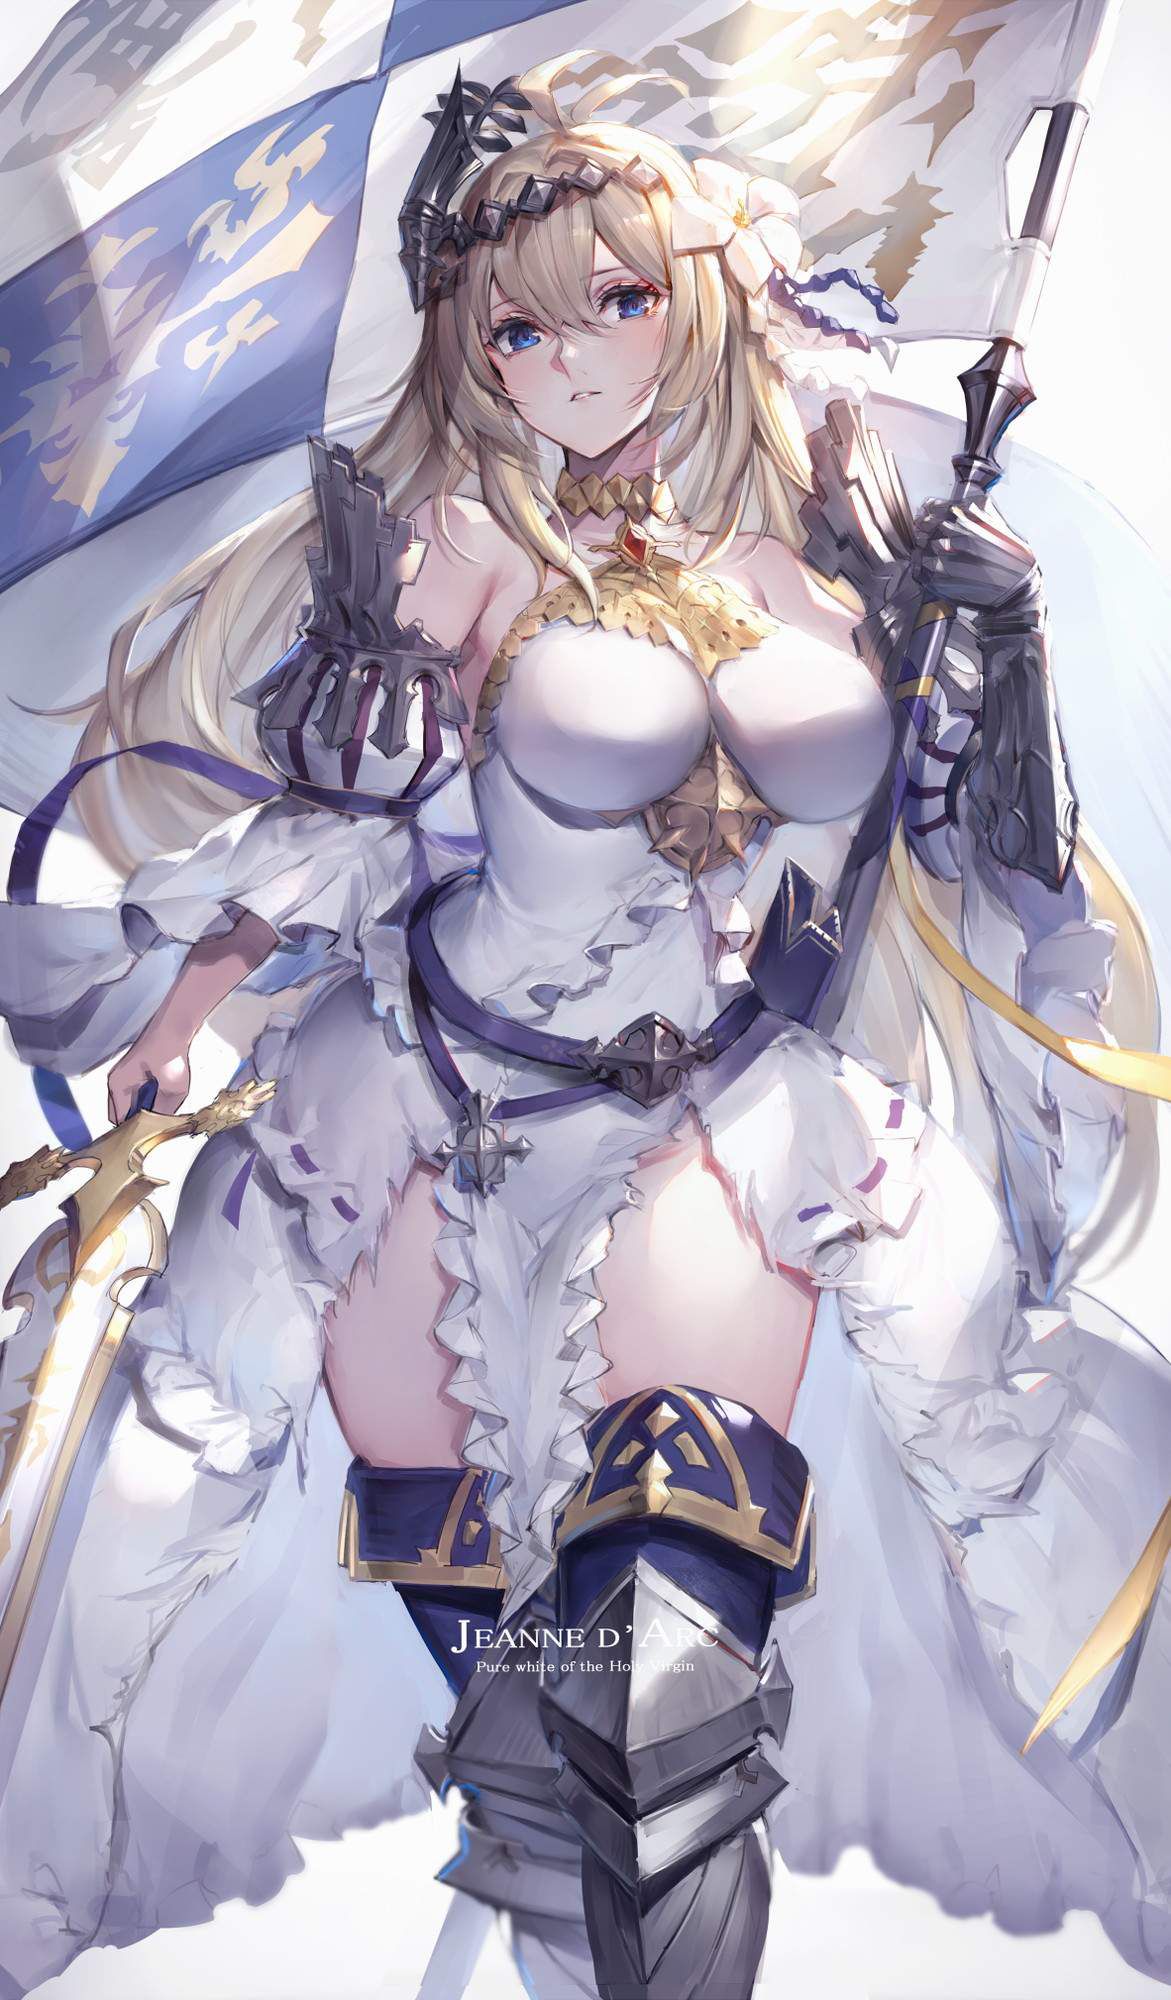 Jeanne Darc's free erotic image summary that makes you happy just by looking at it! (Granblue Fantasy) 16